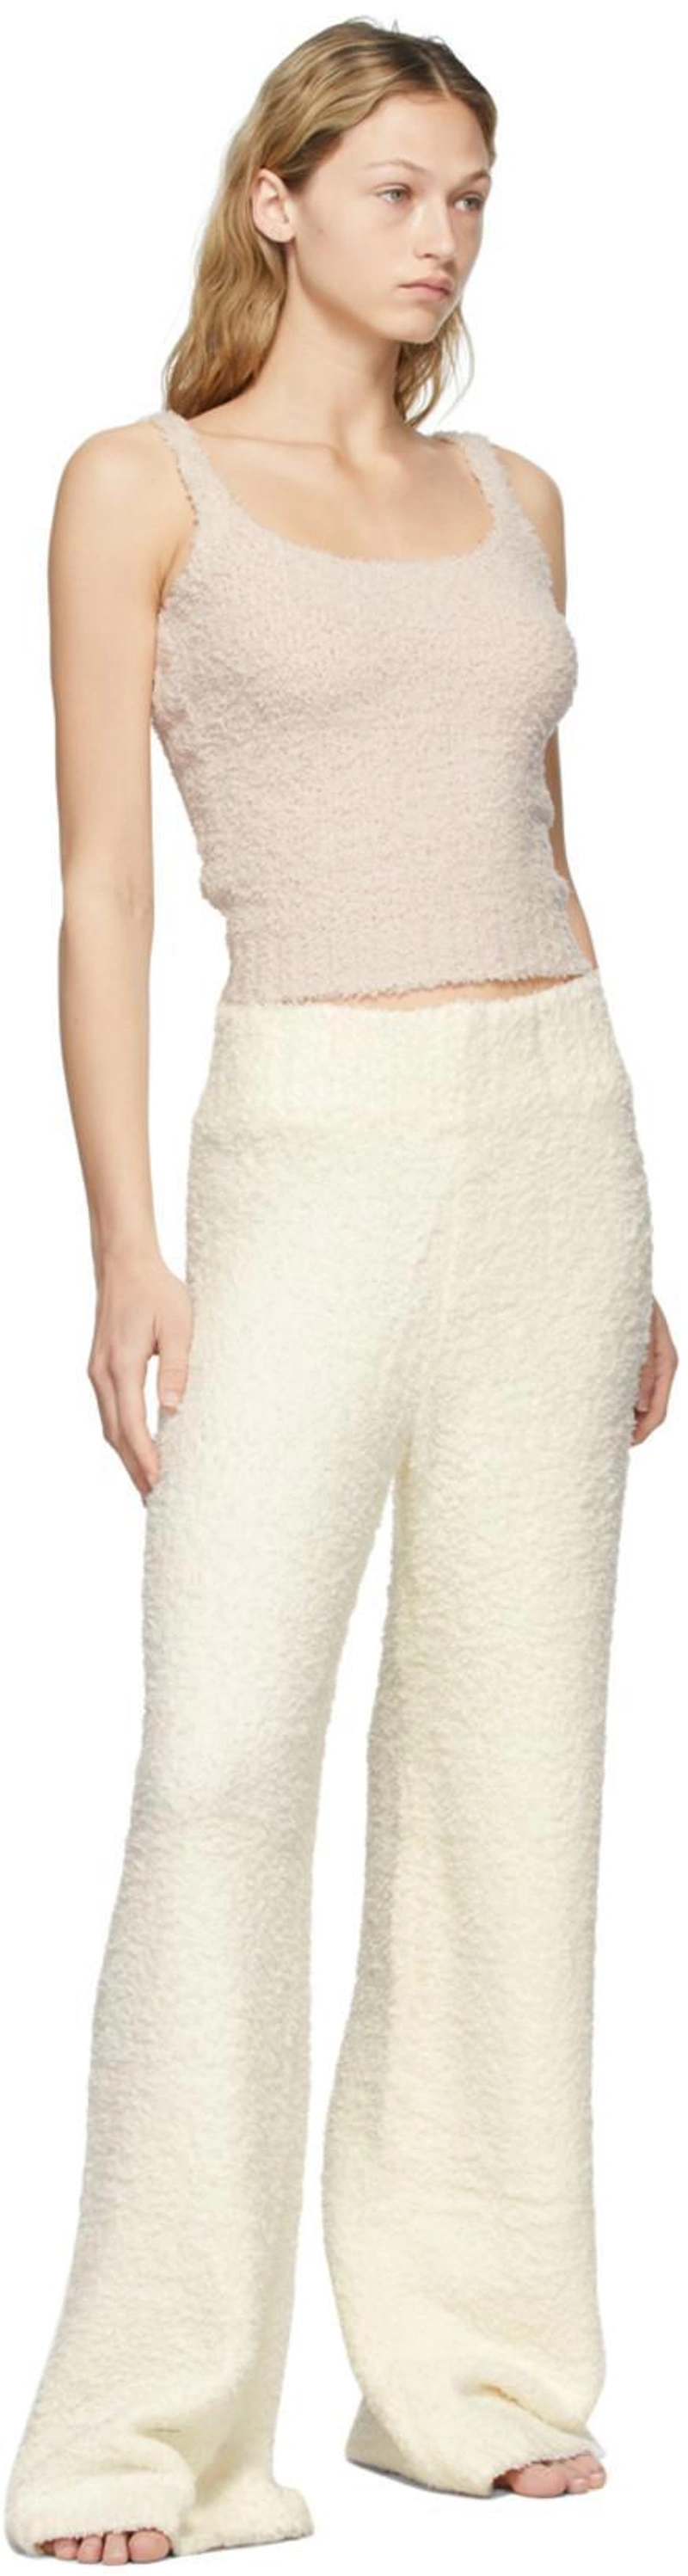 SSENSE's Post | Wearing: Skims Pink Knit Cozy Tank Top In Dusk; Skims Off-white Knit Cozy Lounge Trousers In Ivory